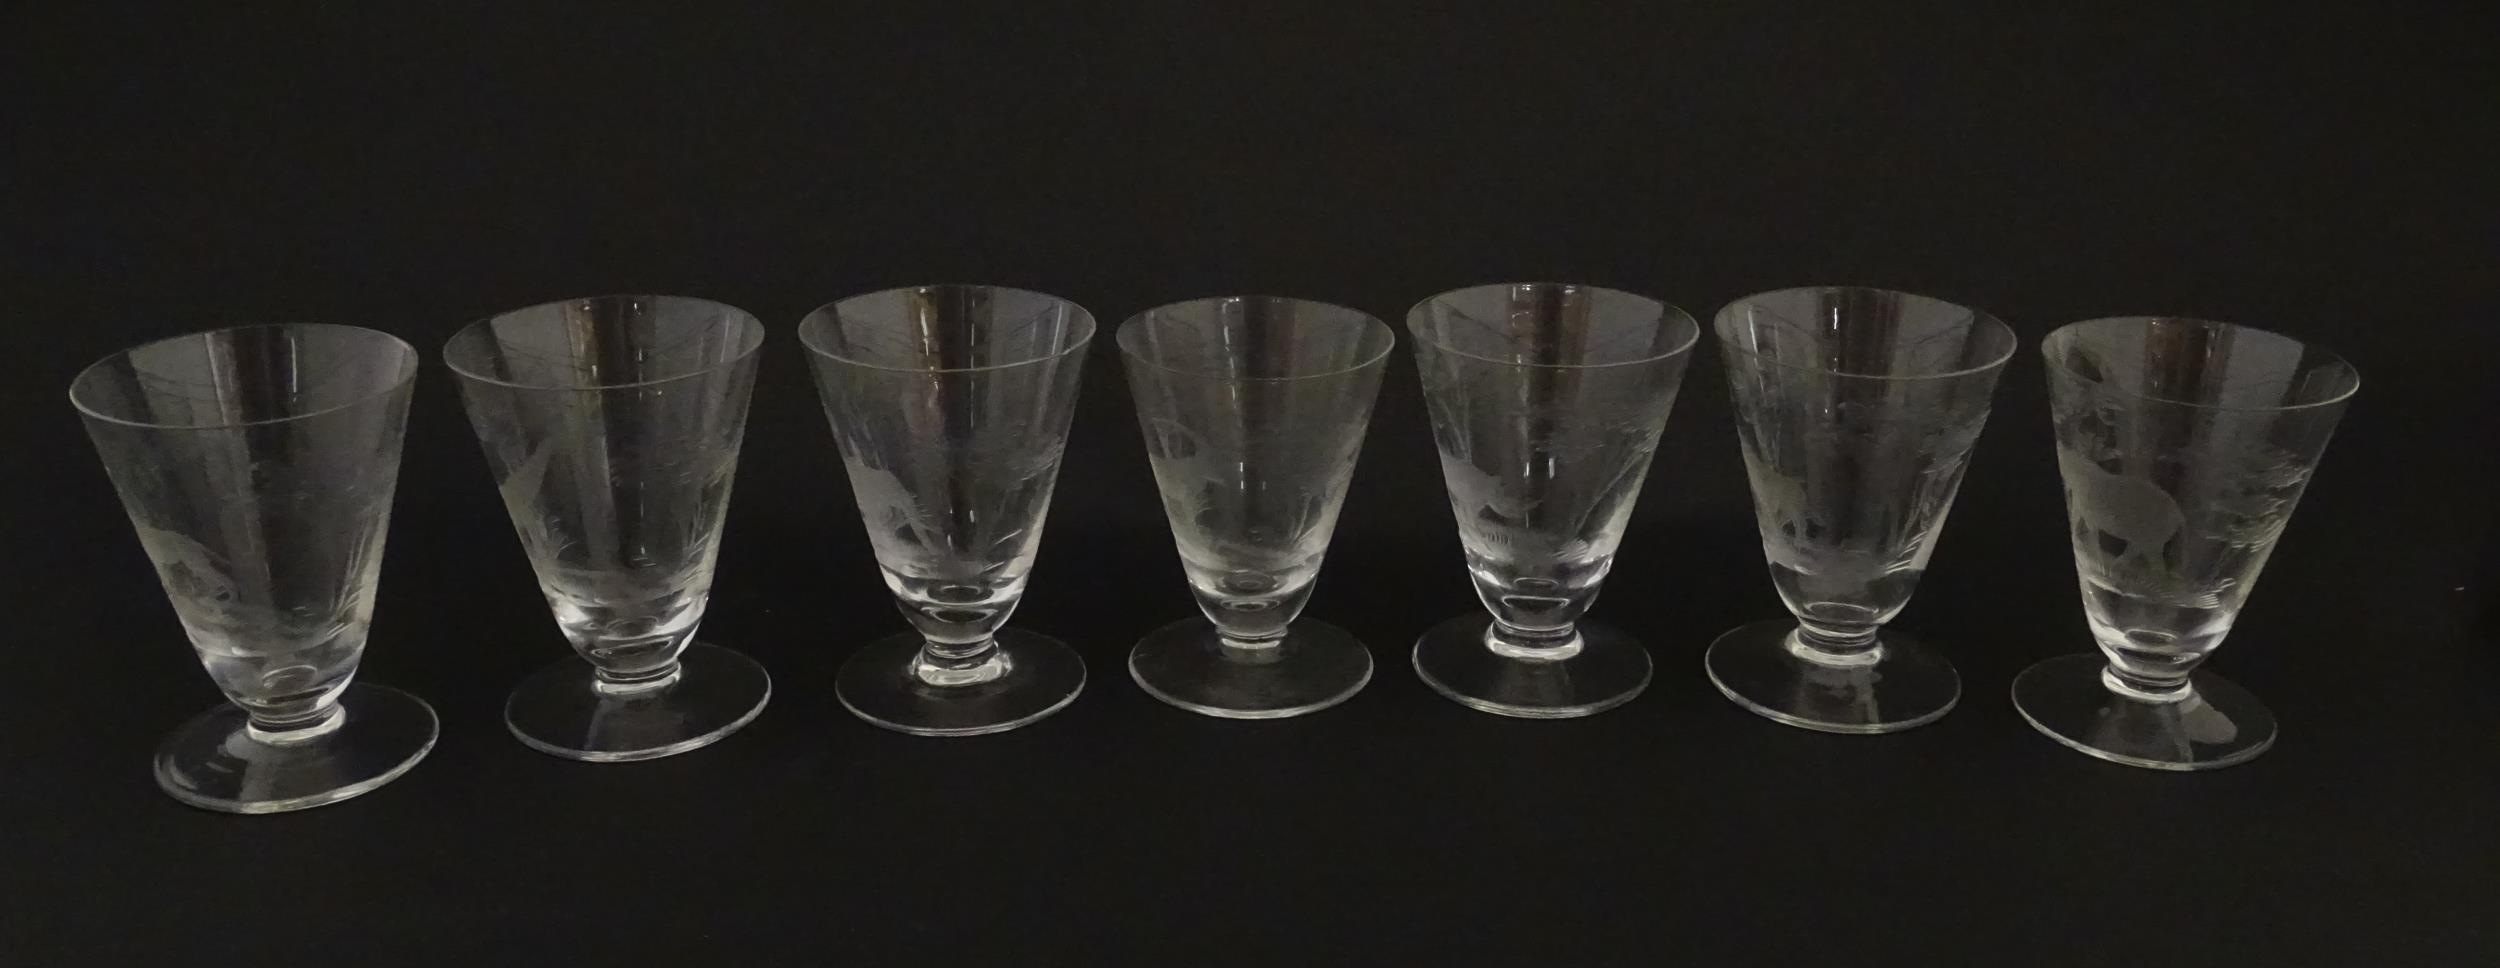 Rowland Ward sherry / liquor glasses with engraved Safari animal detail. Unsigned. Largest approx. - Image 14 of 26